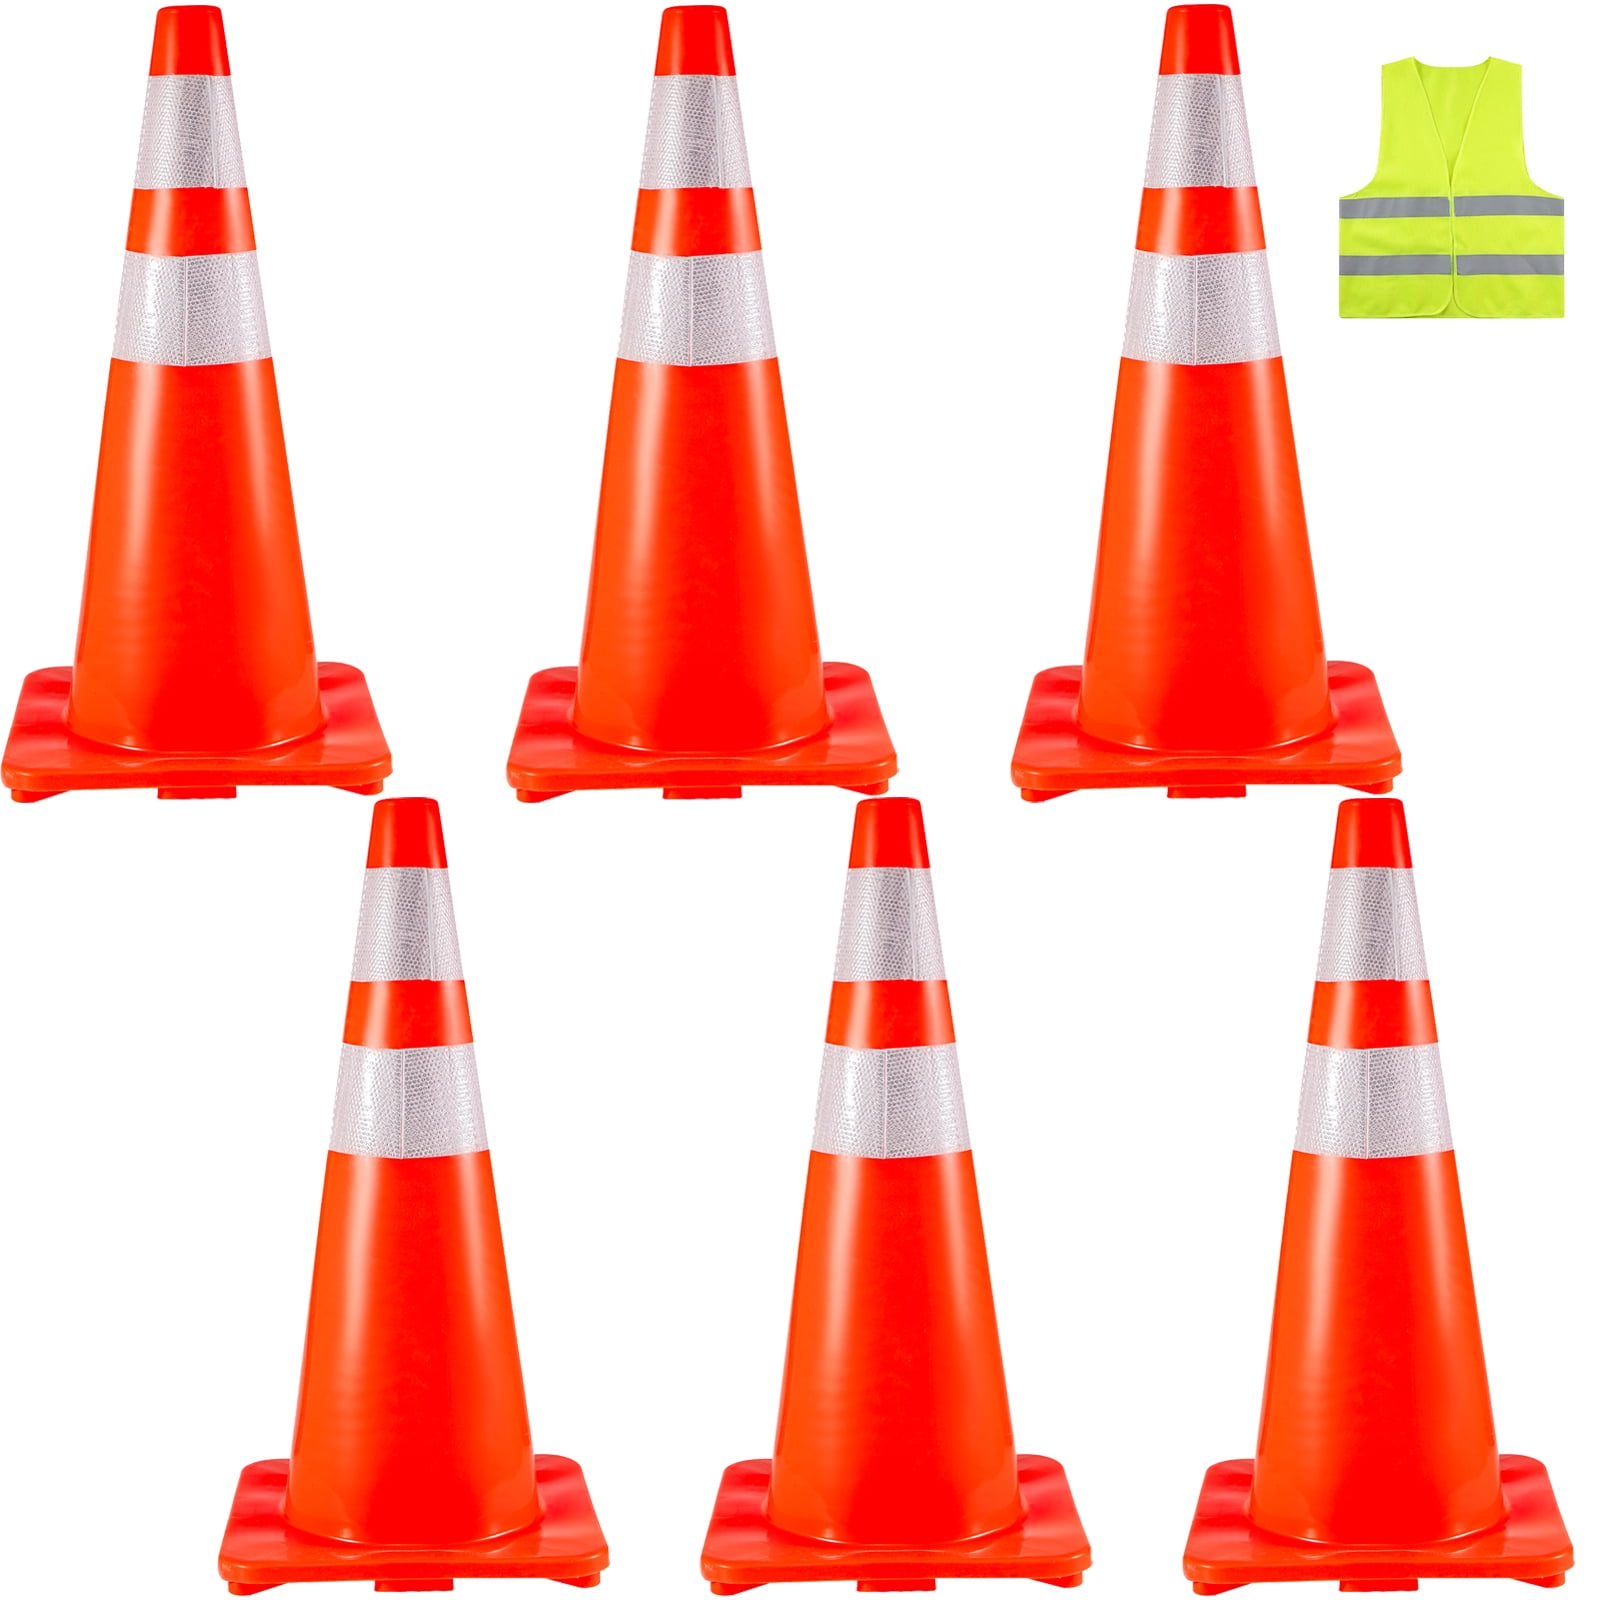 PVC Road Traffic Cones Reflective Road Safety Barrier Cone Car Parking Cones 